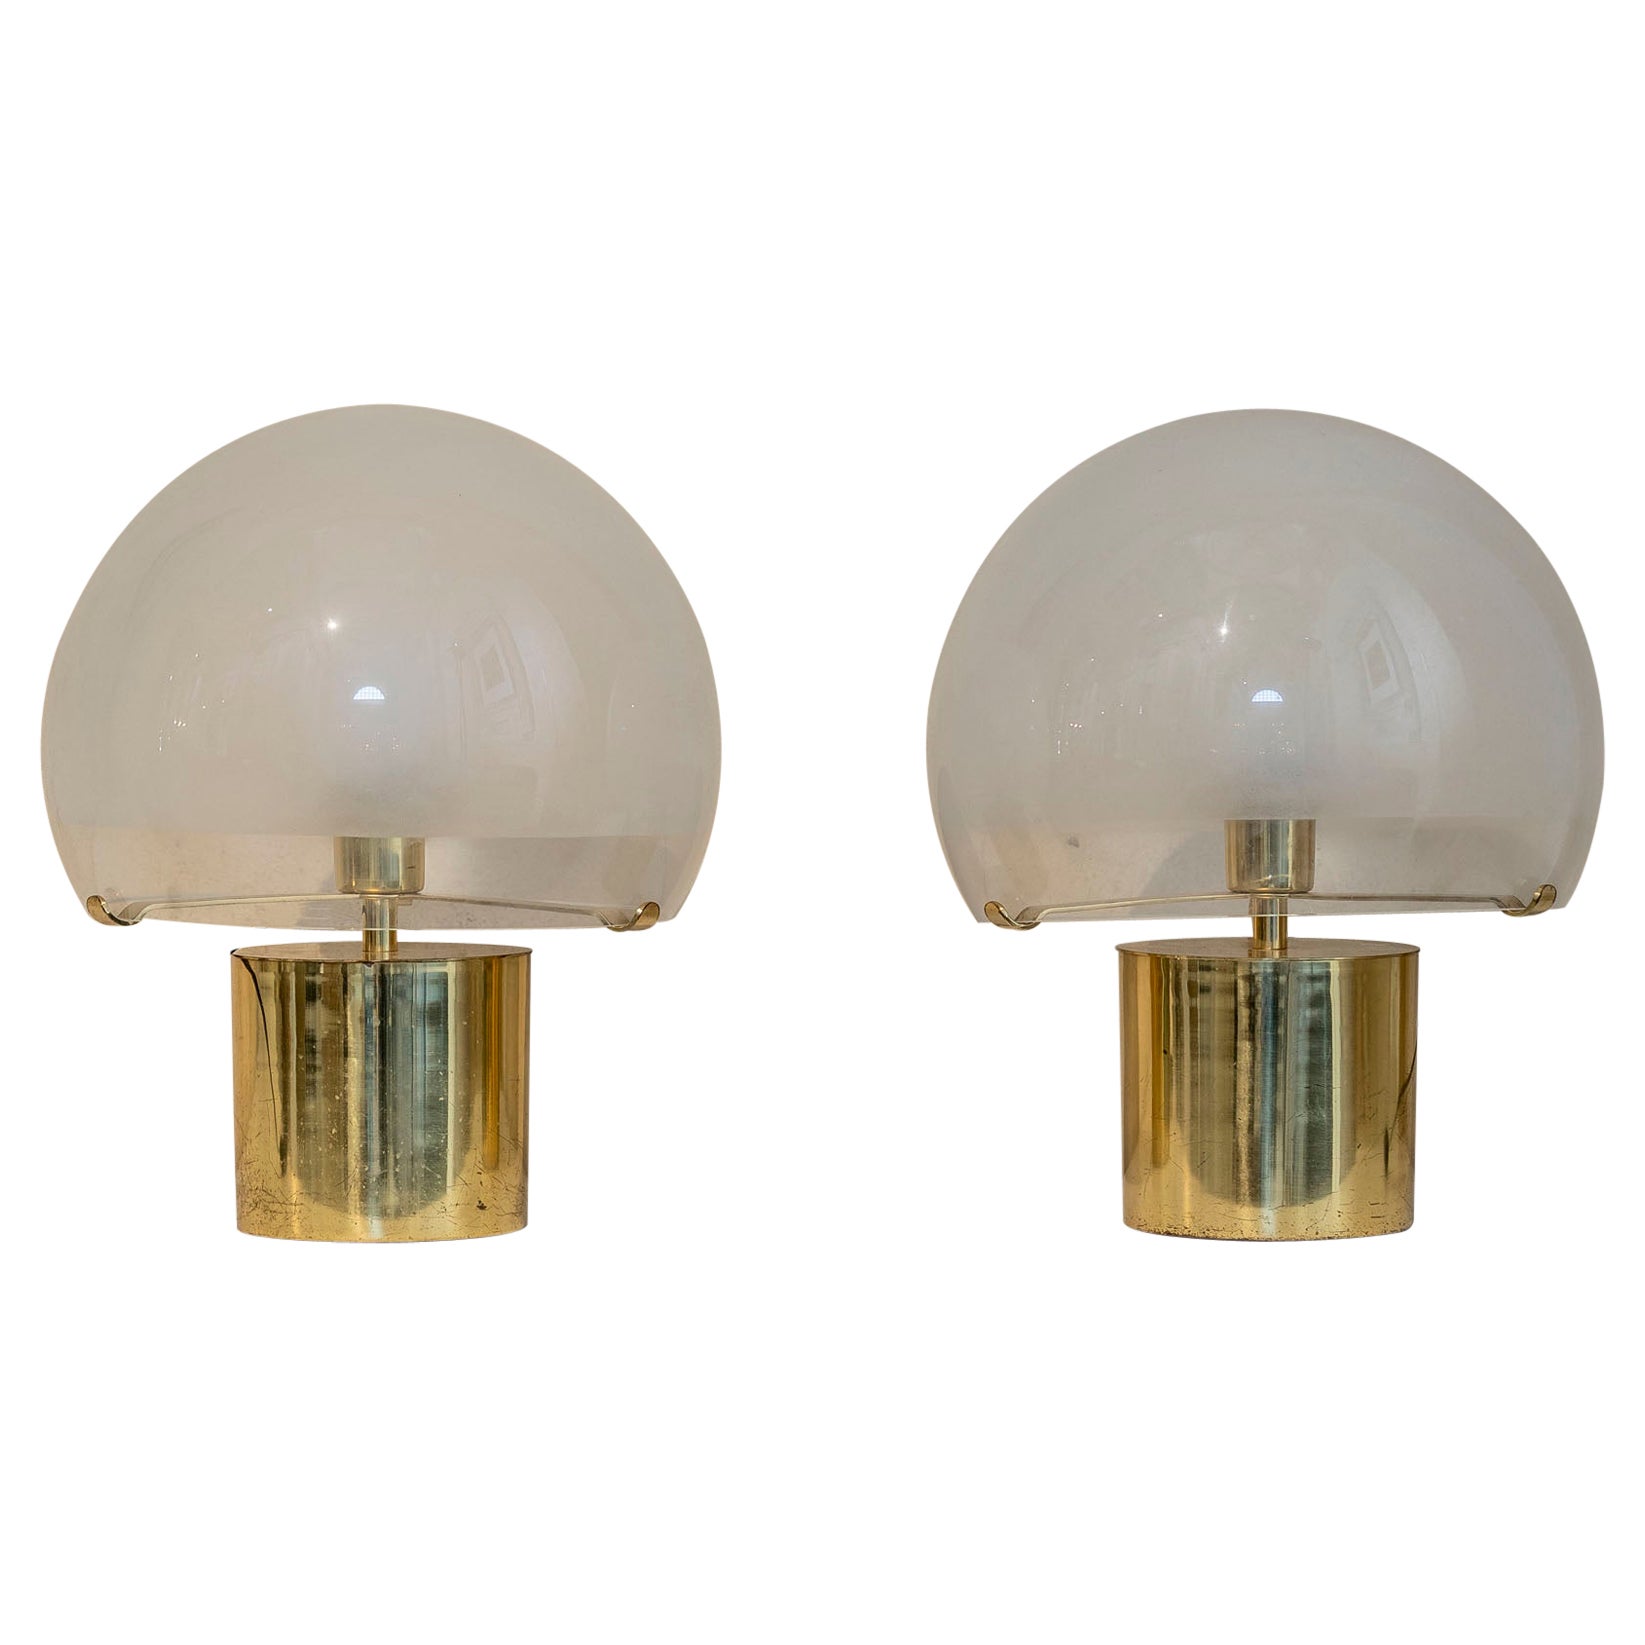 Pair of "Porcino" Table Lamp with Brass Basement